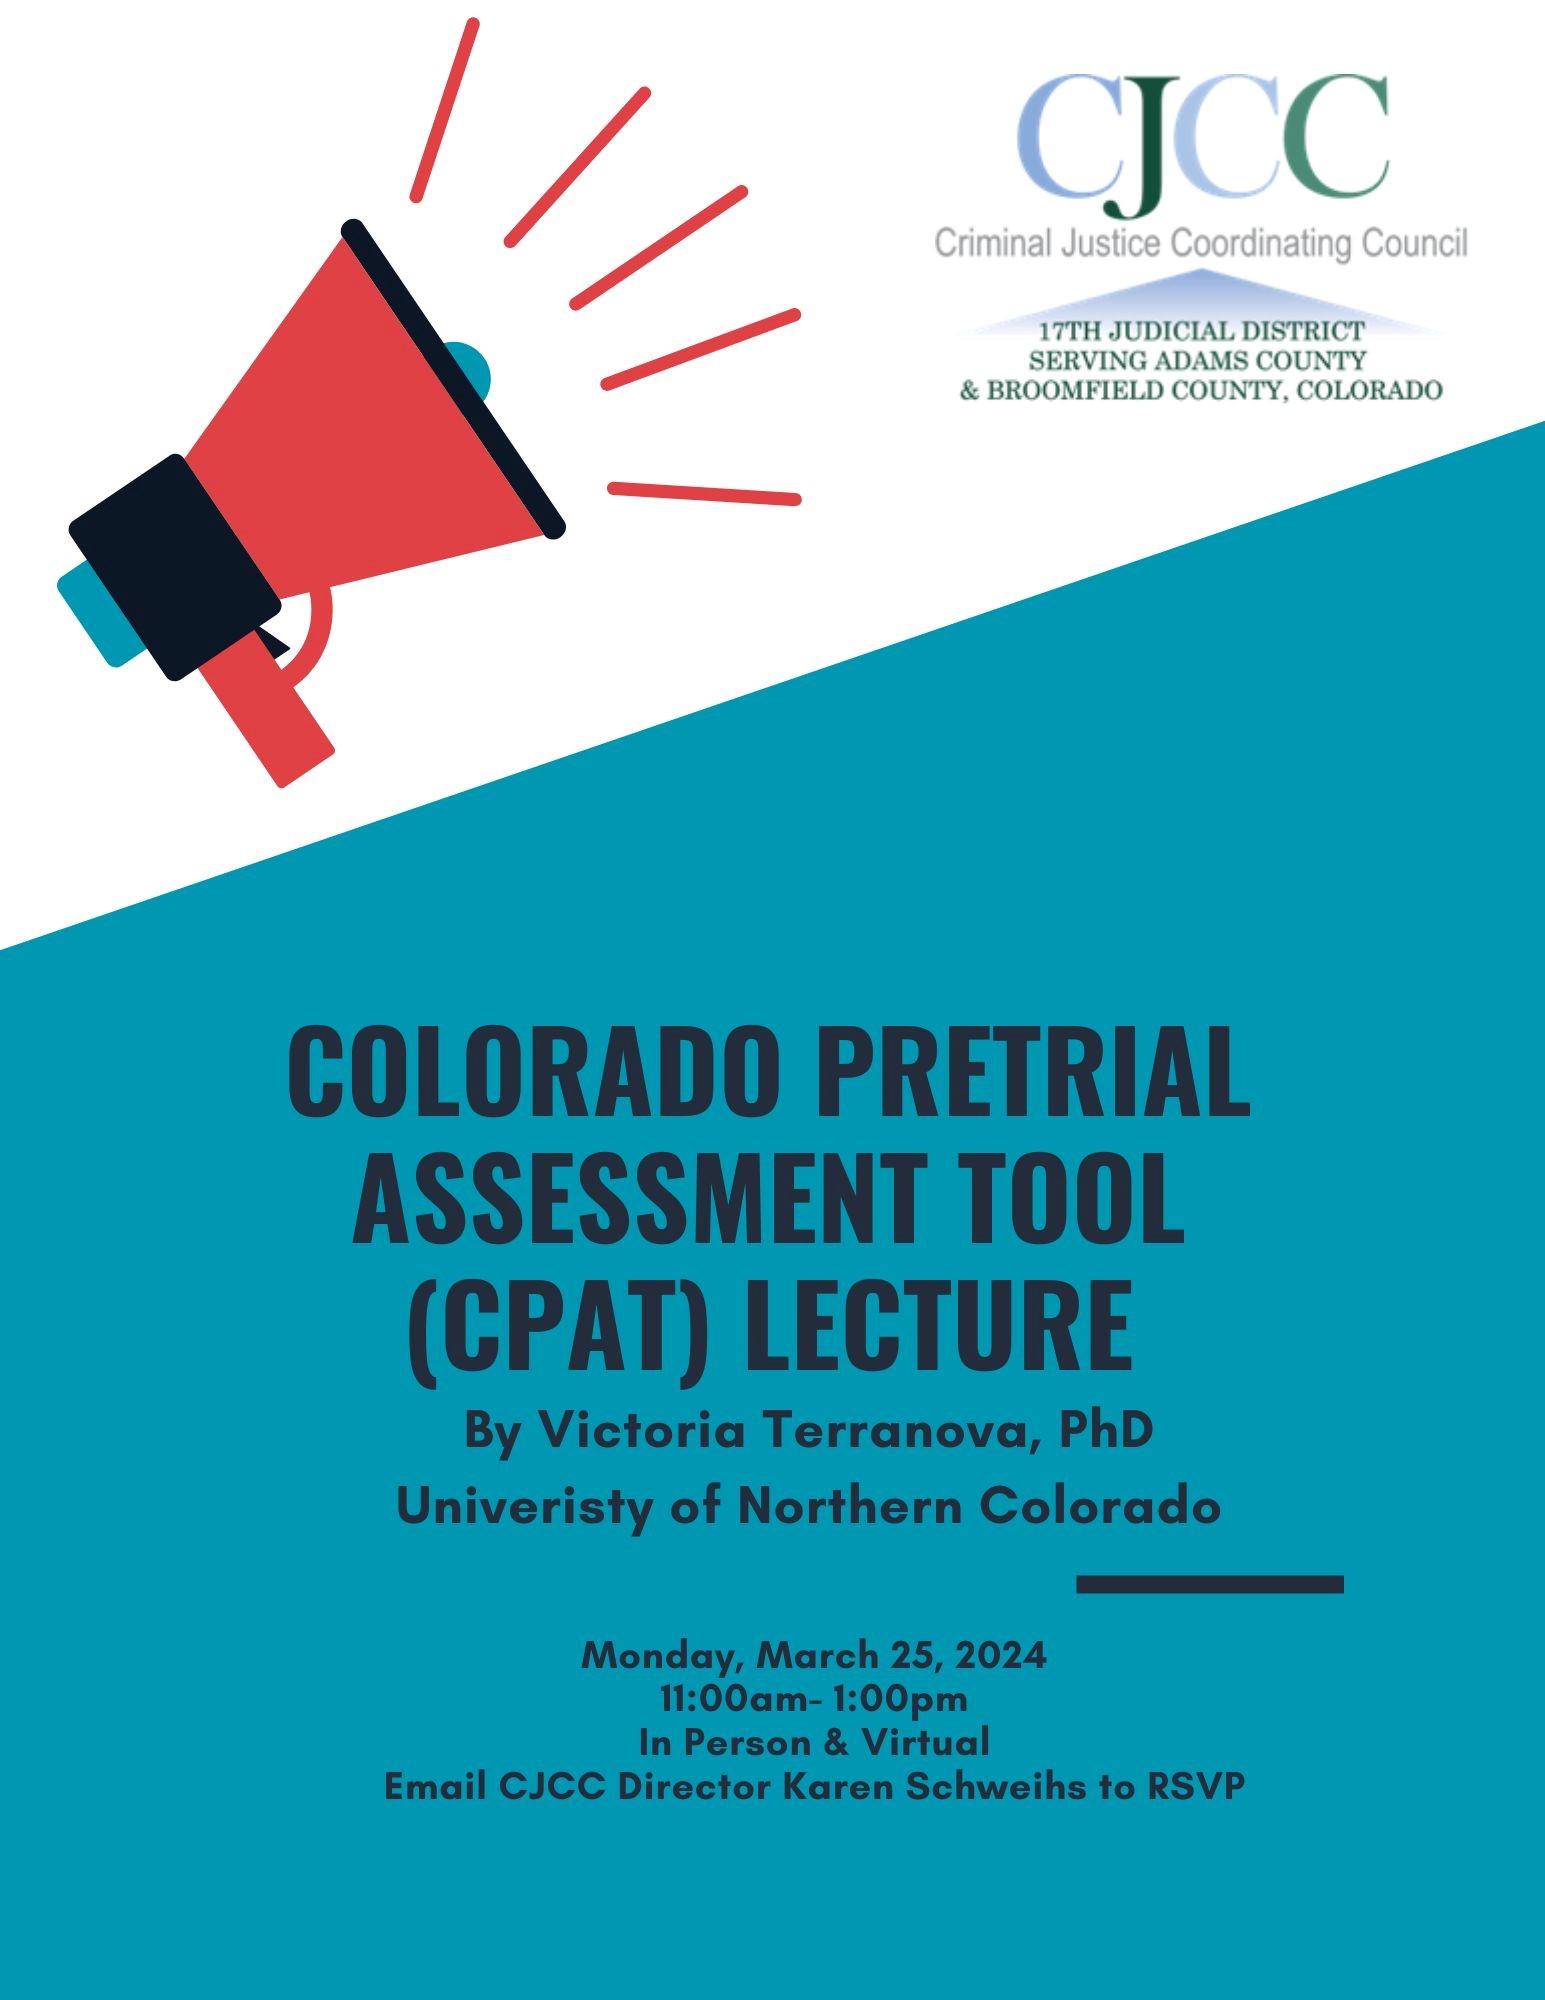 Colorado Pretrial Assessment Tool Lecture Flyer